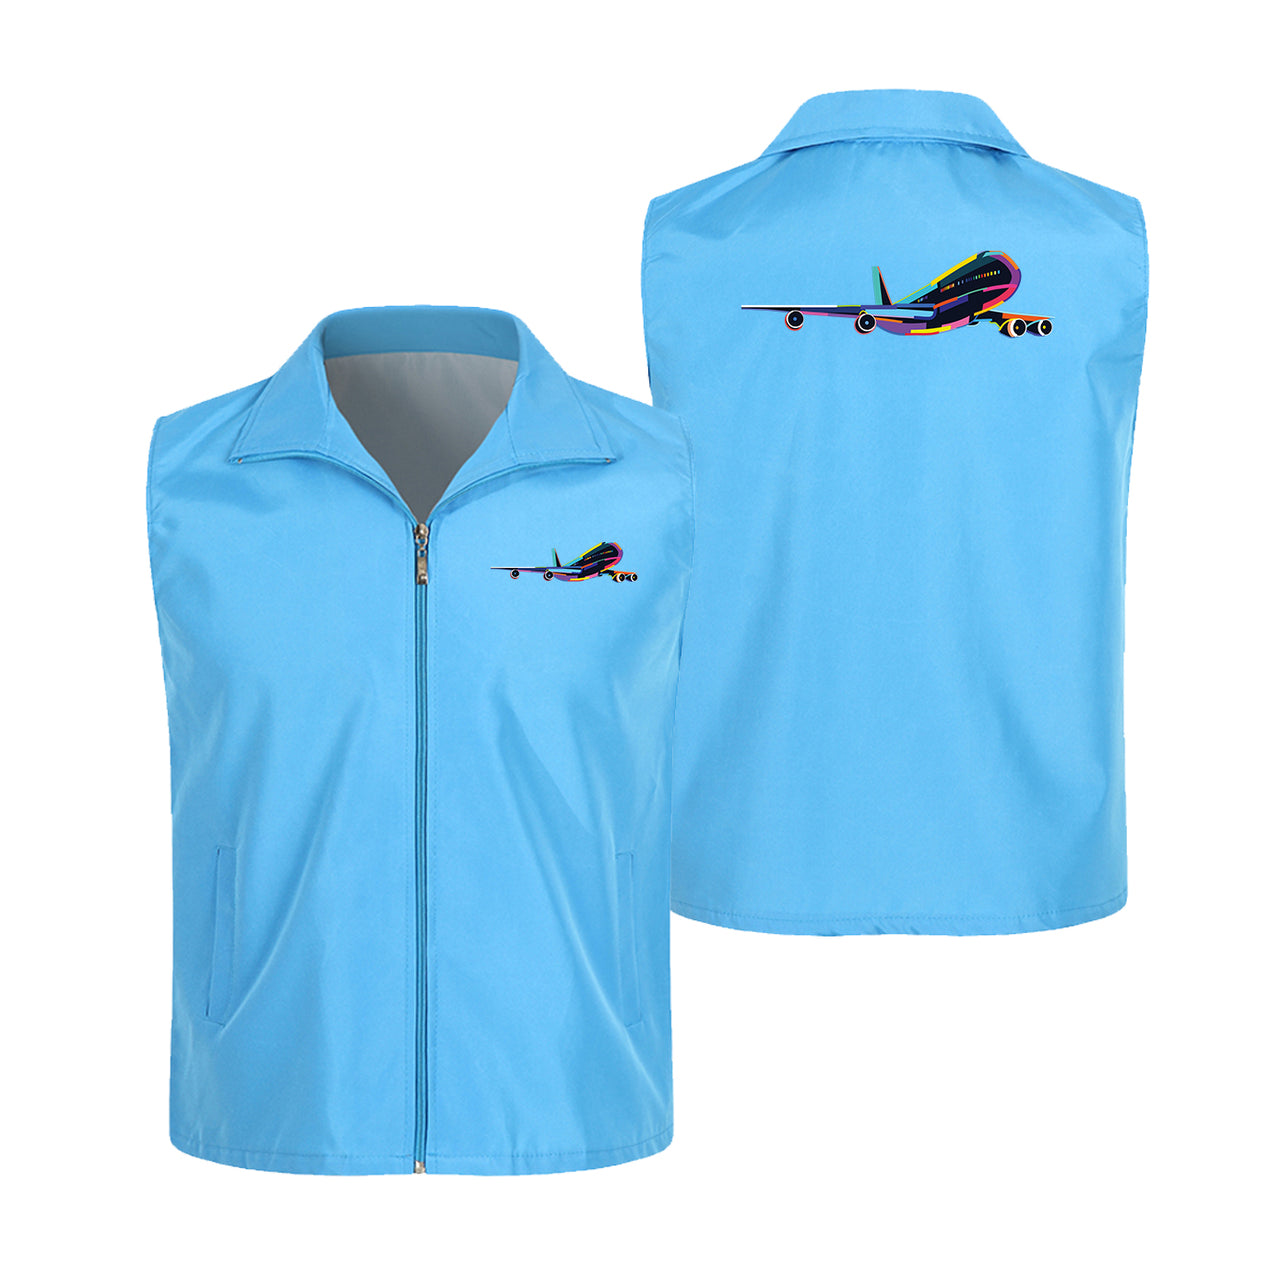 Multicolor Airplane Designed Thin Style Vests